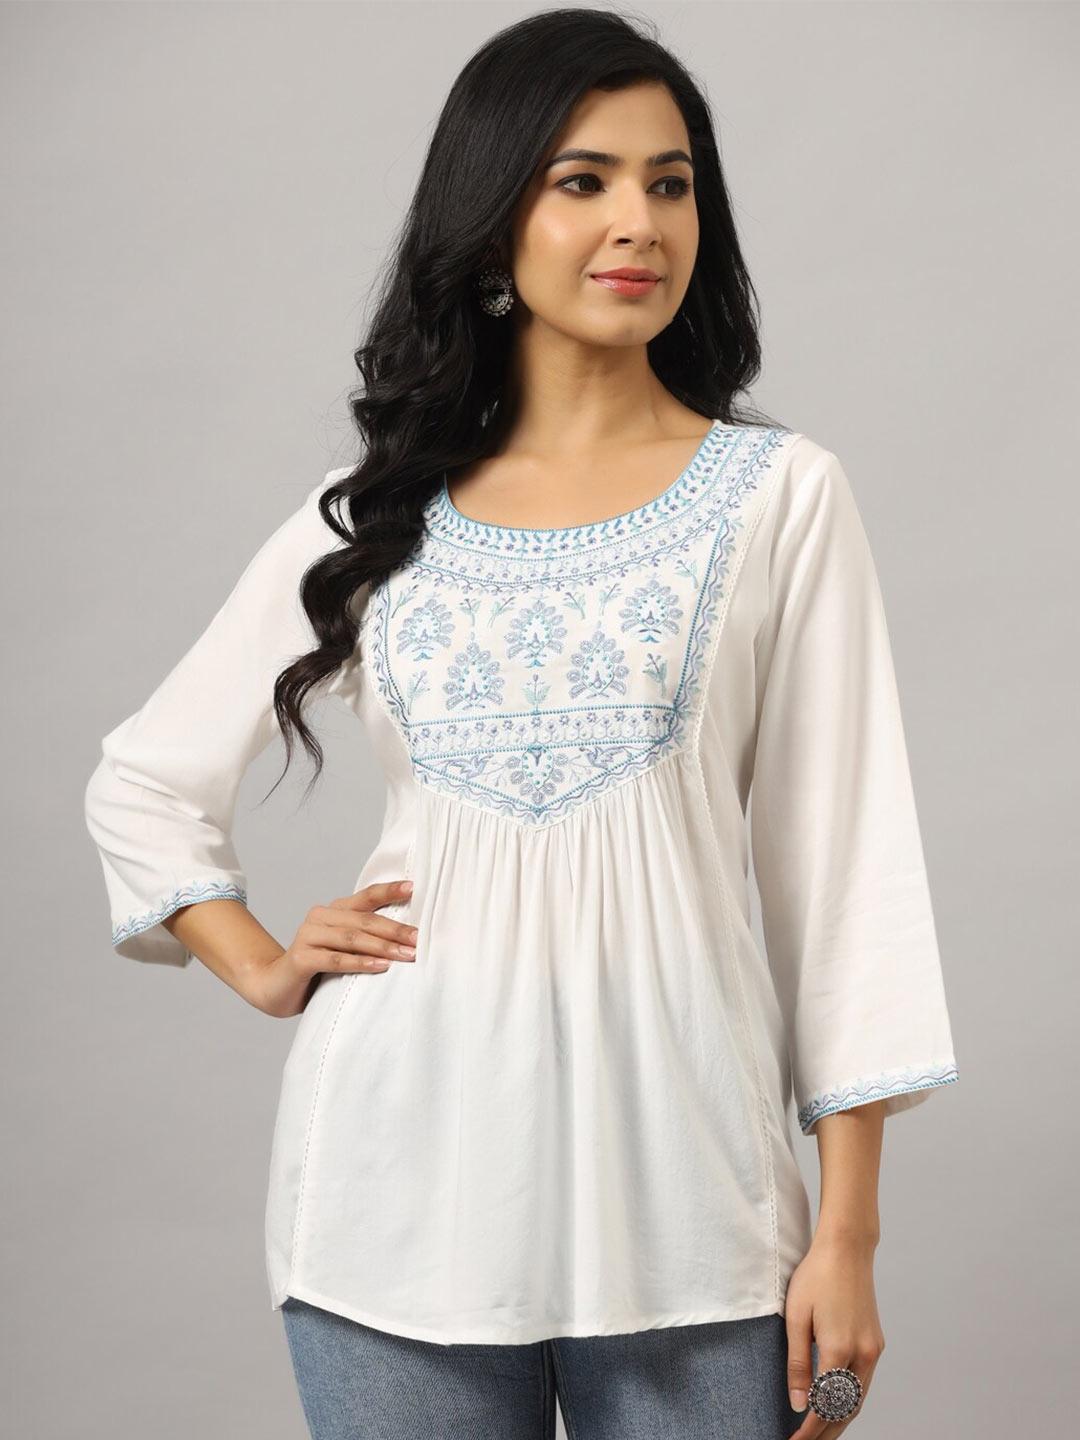 amchoor floral embroidered round neck empire top